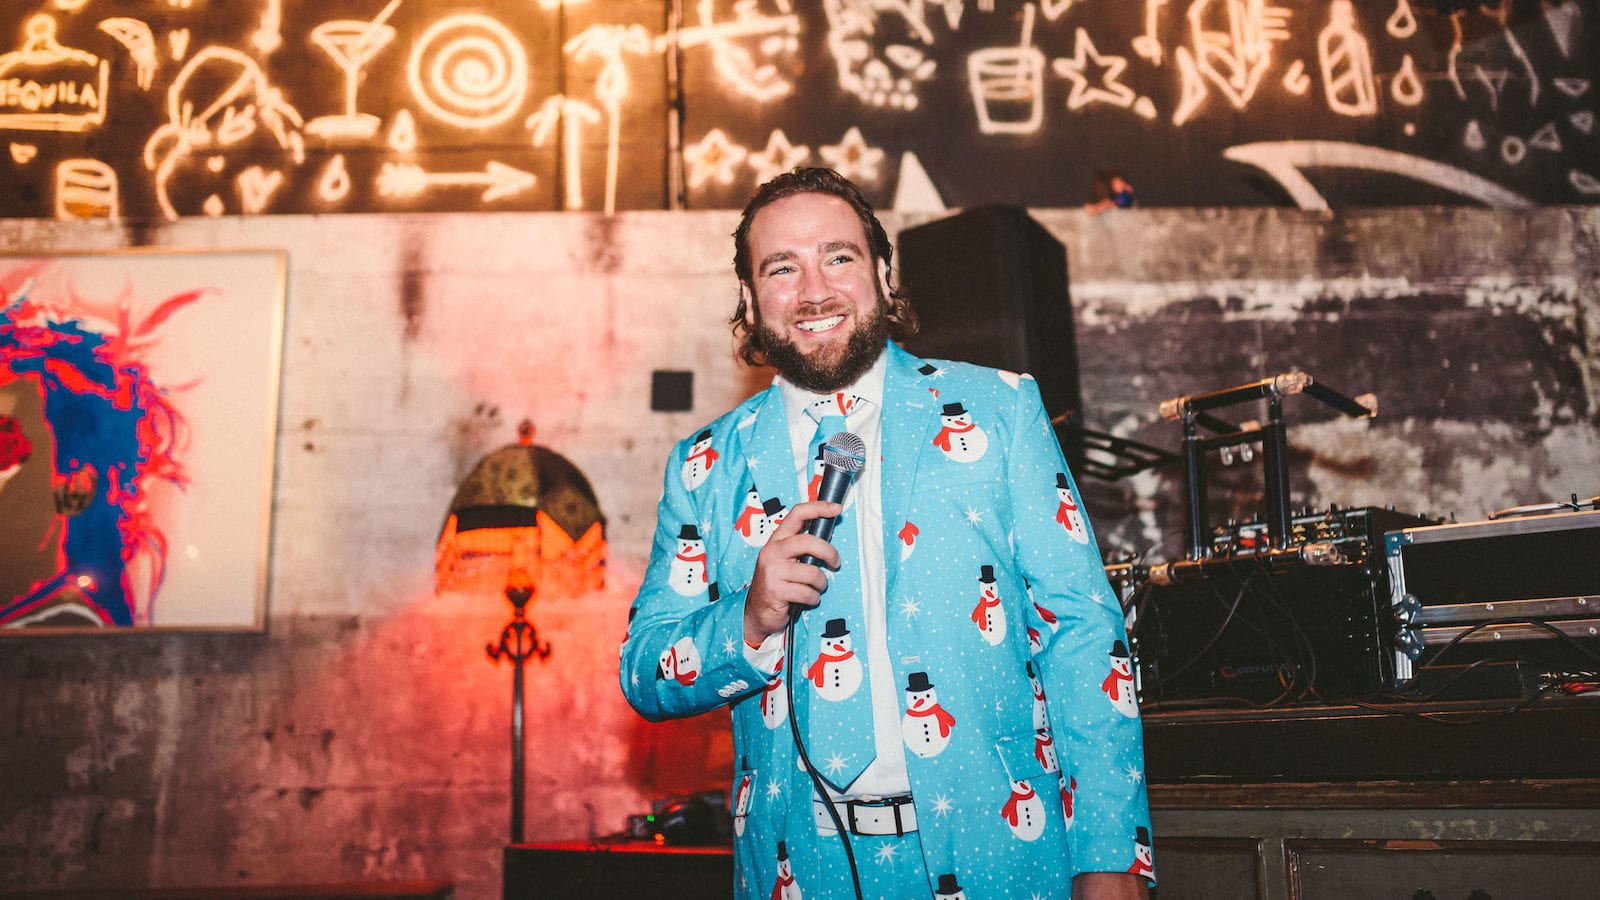 Van Horn Man wearing a light blue jacket and tie with graphic snowmen on it smiling and holding a microphone